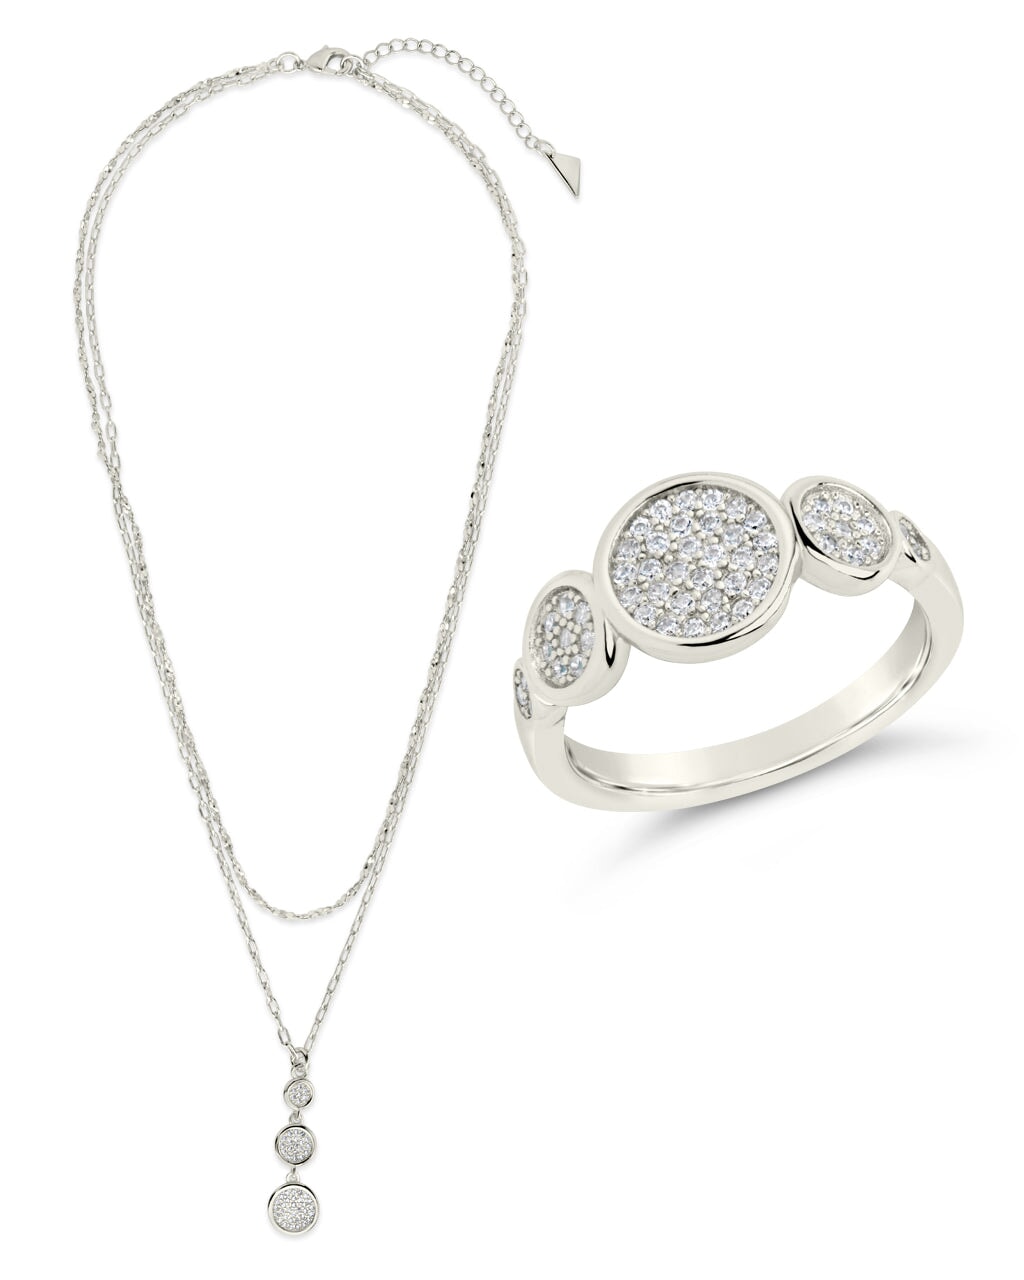 CZ Bubble Cocktail Ring & Layered Necklace Set Bundles Sterling Forever 